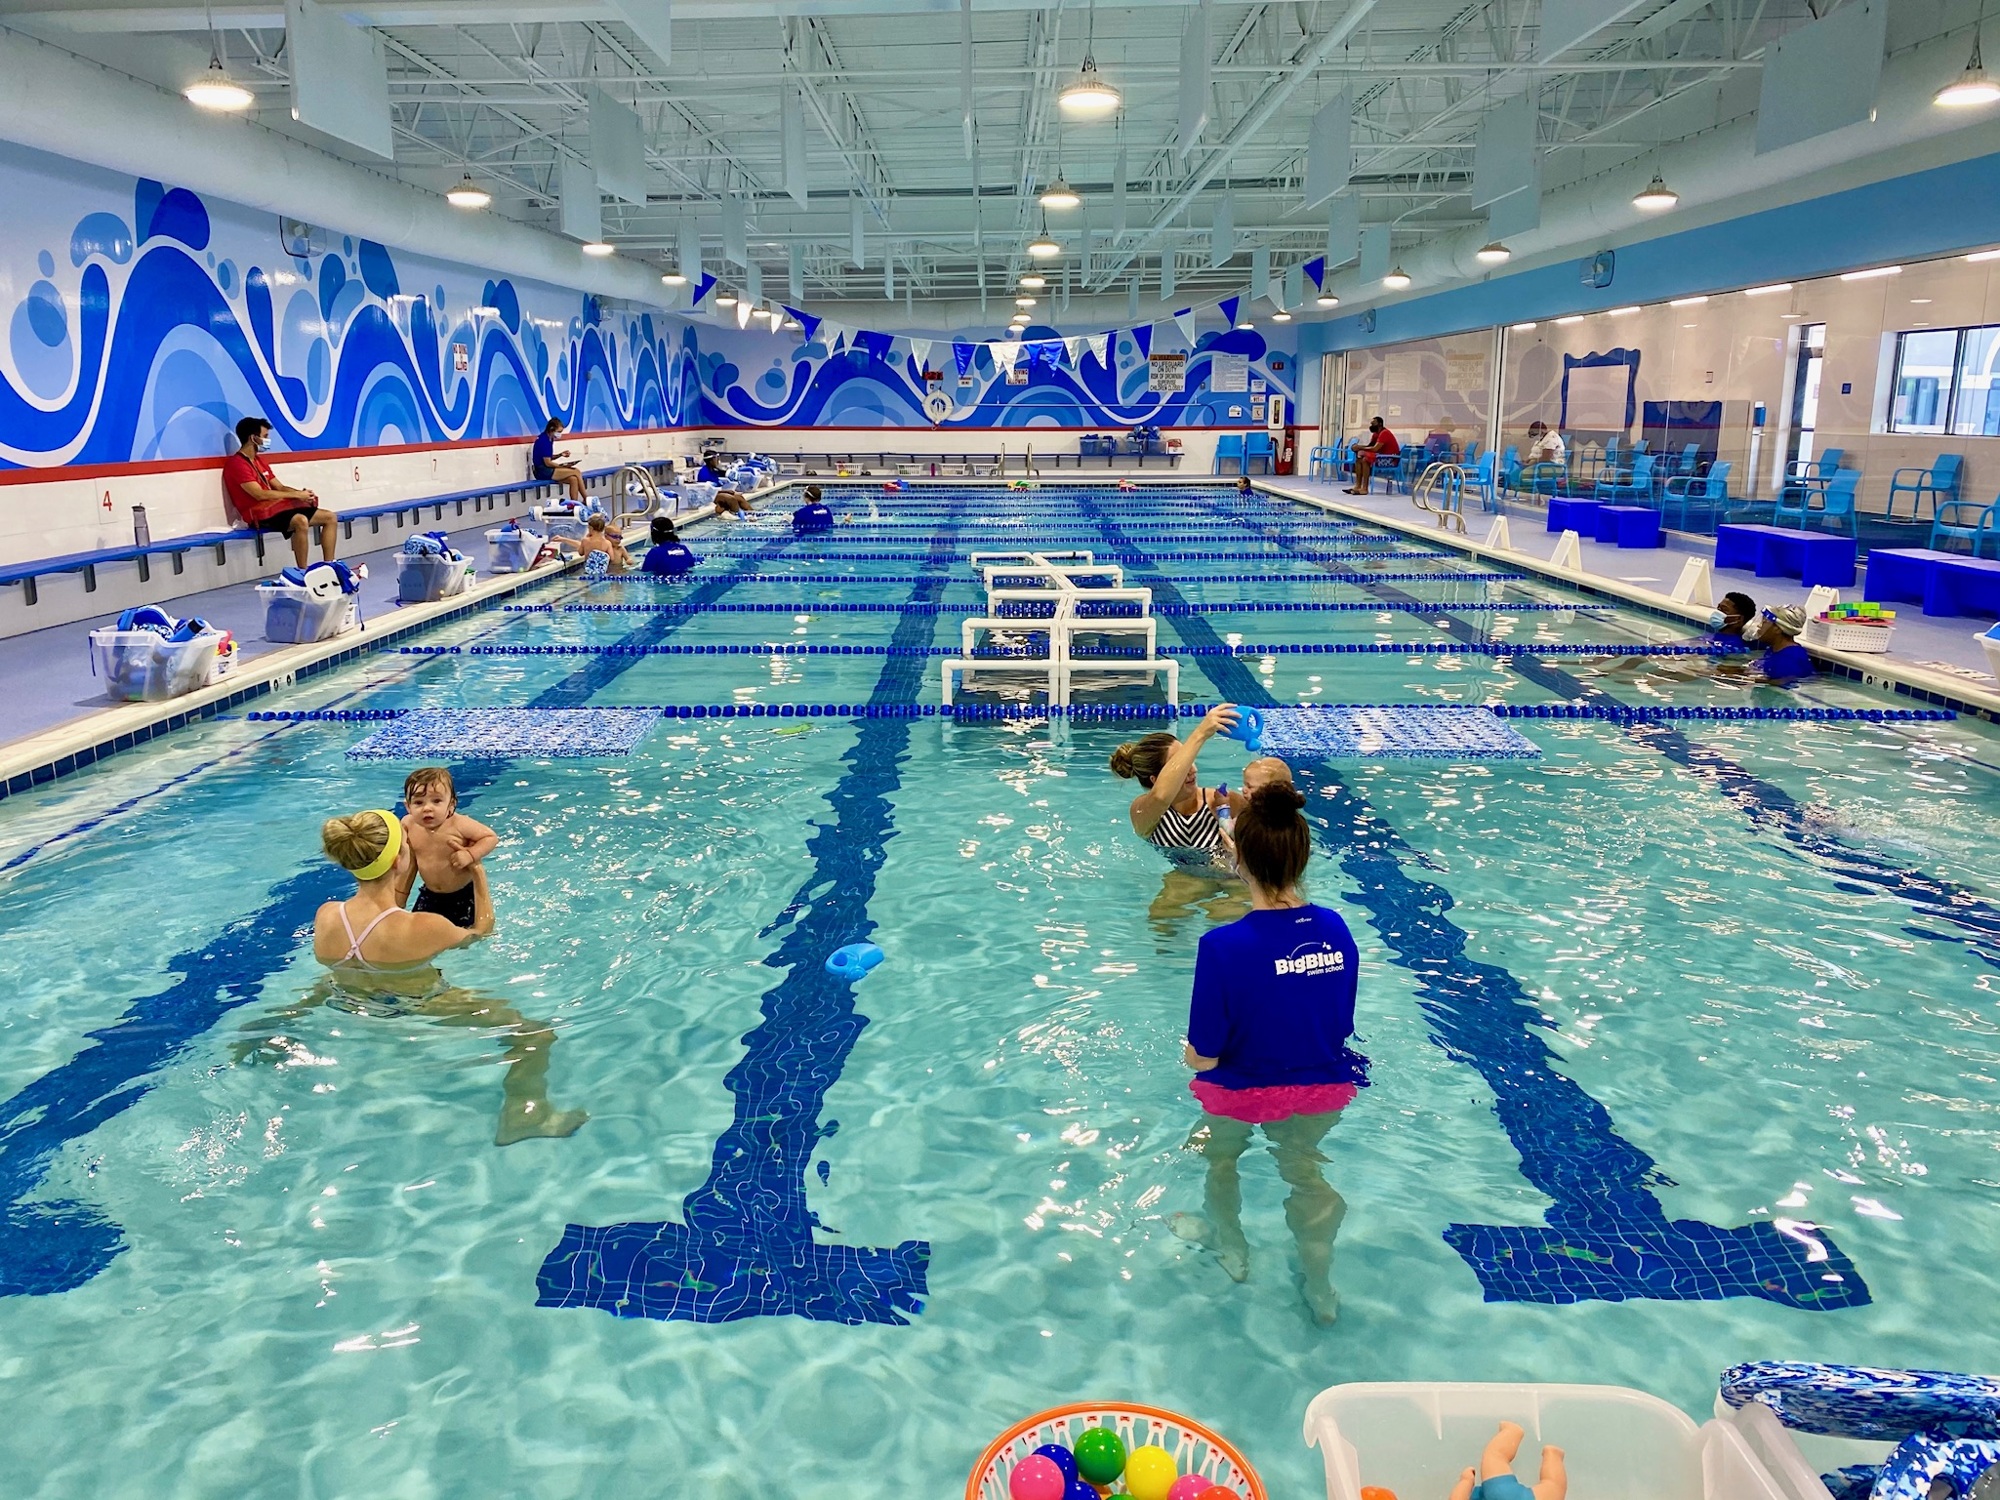 Courtesy. Big Blue Swim School, a franchise-based swim lesson business, plans to open to 20 locations in Florida in 2021.